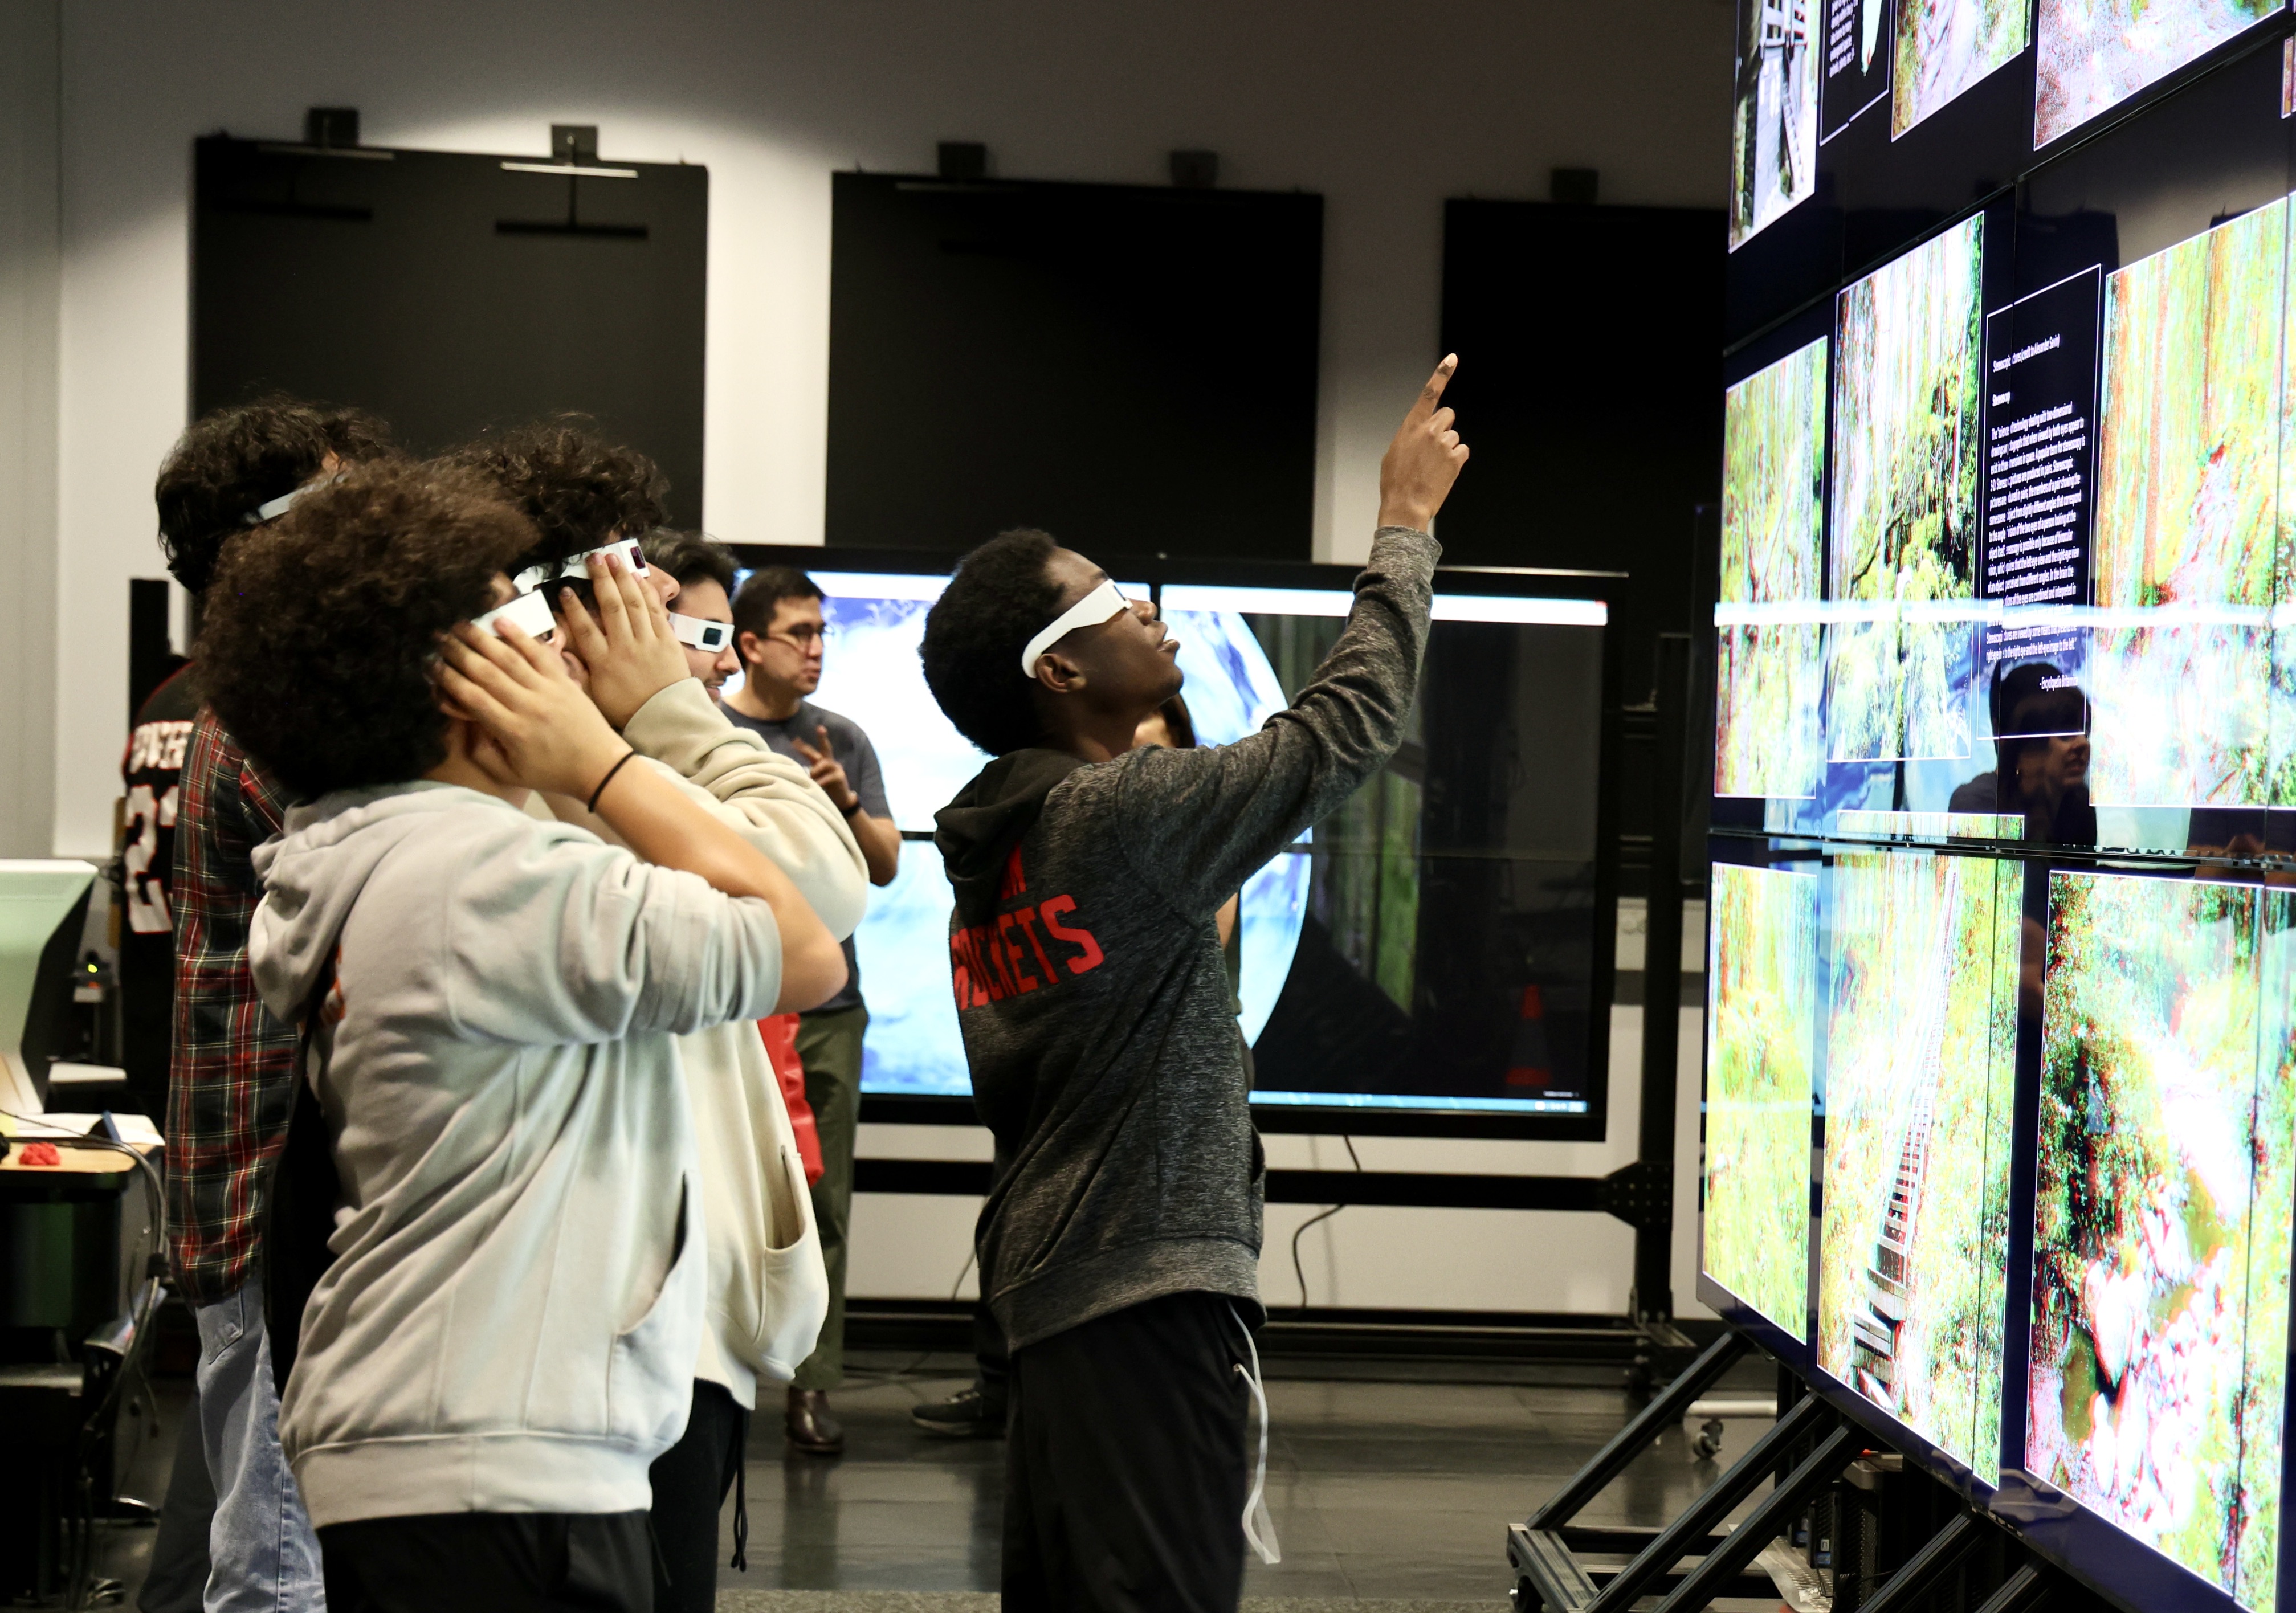 Del Valle students try out VR in the TACC visualization lab at the Oden Institute. Credit: Joanne Foote/Oden Institute